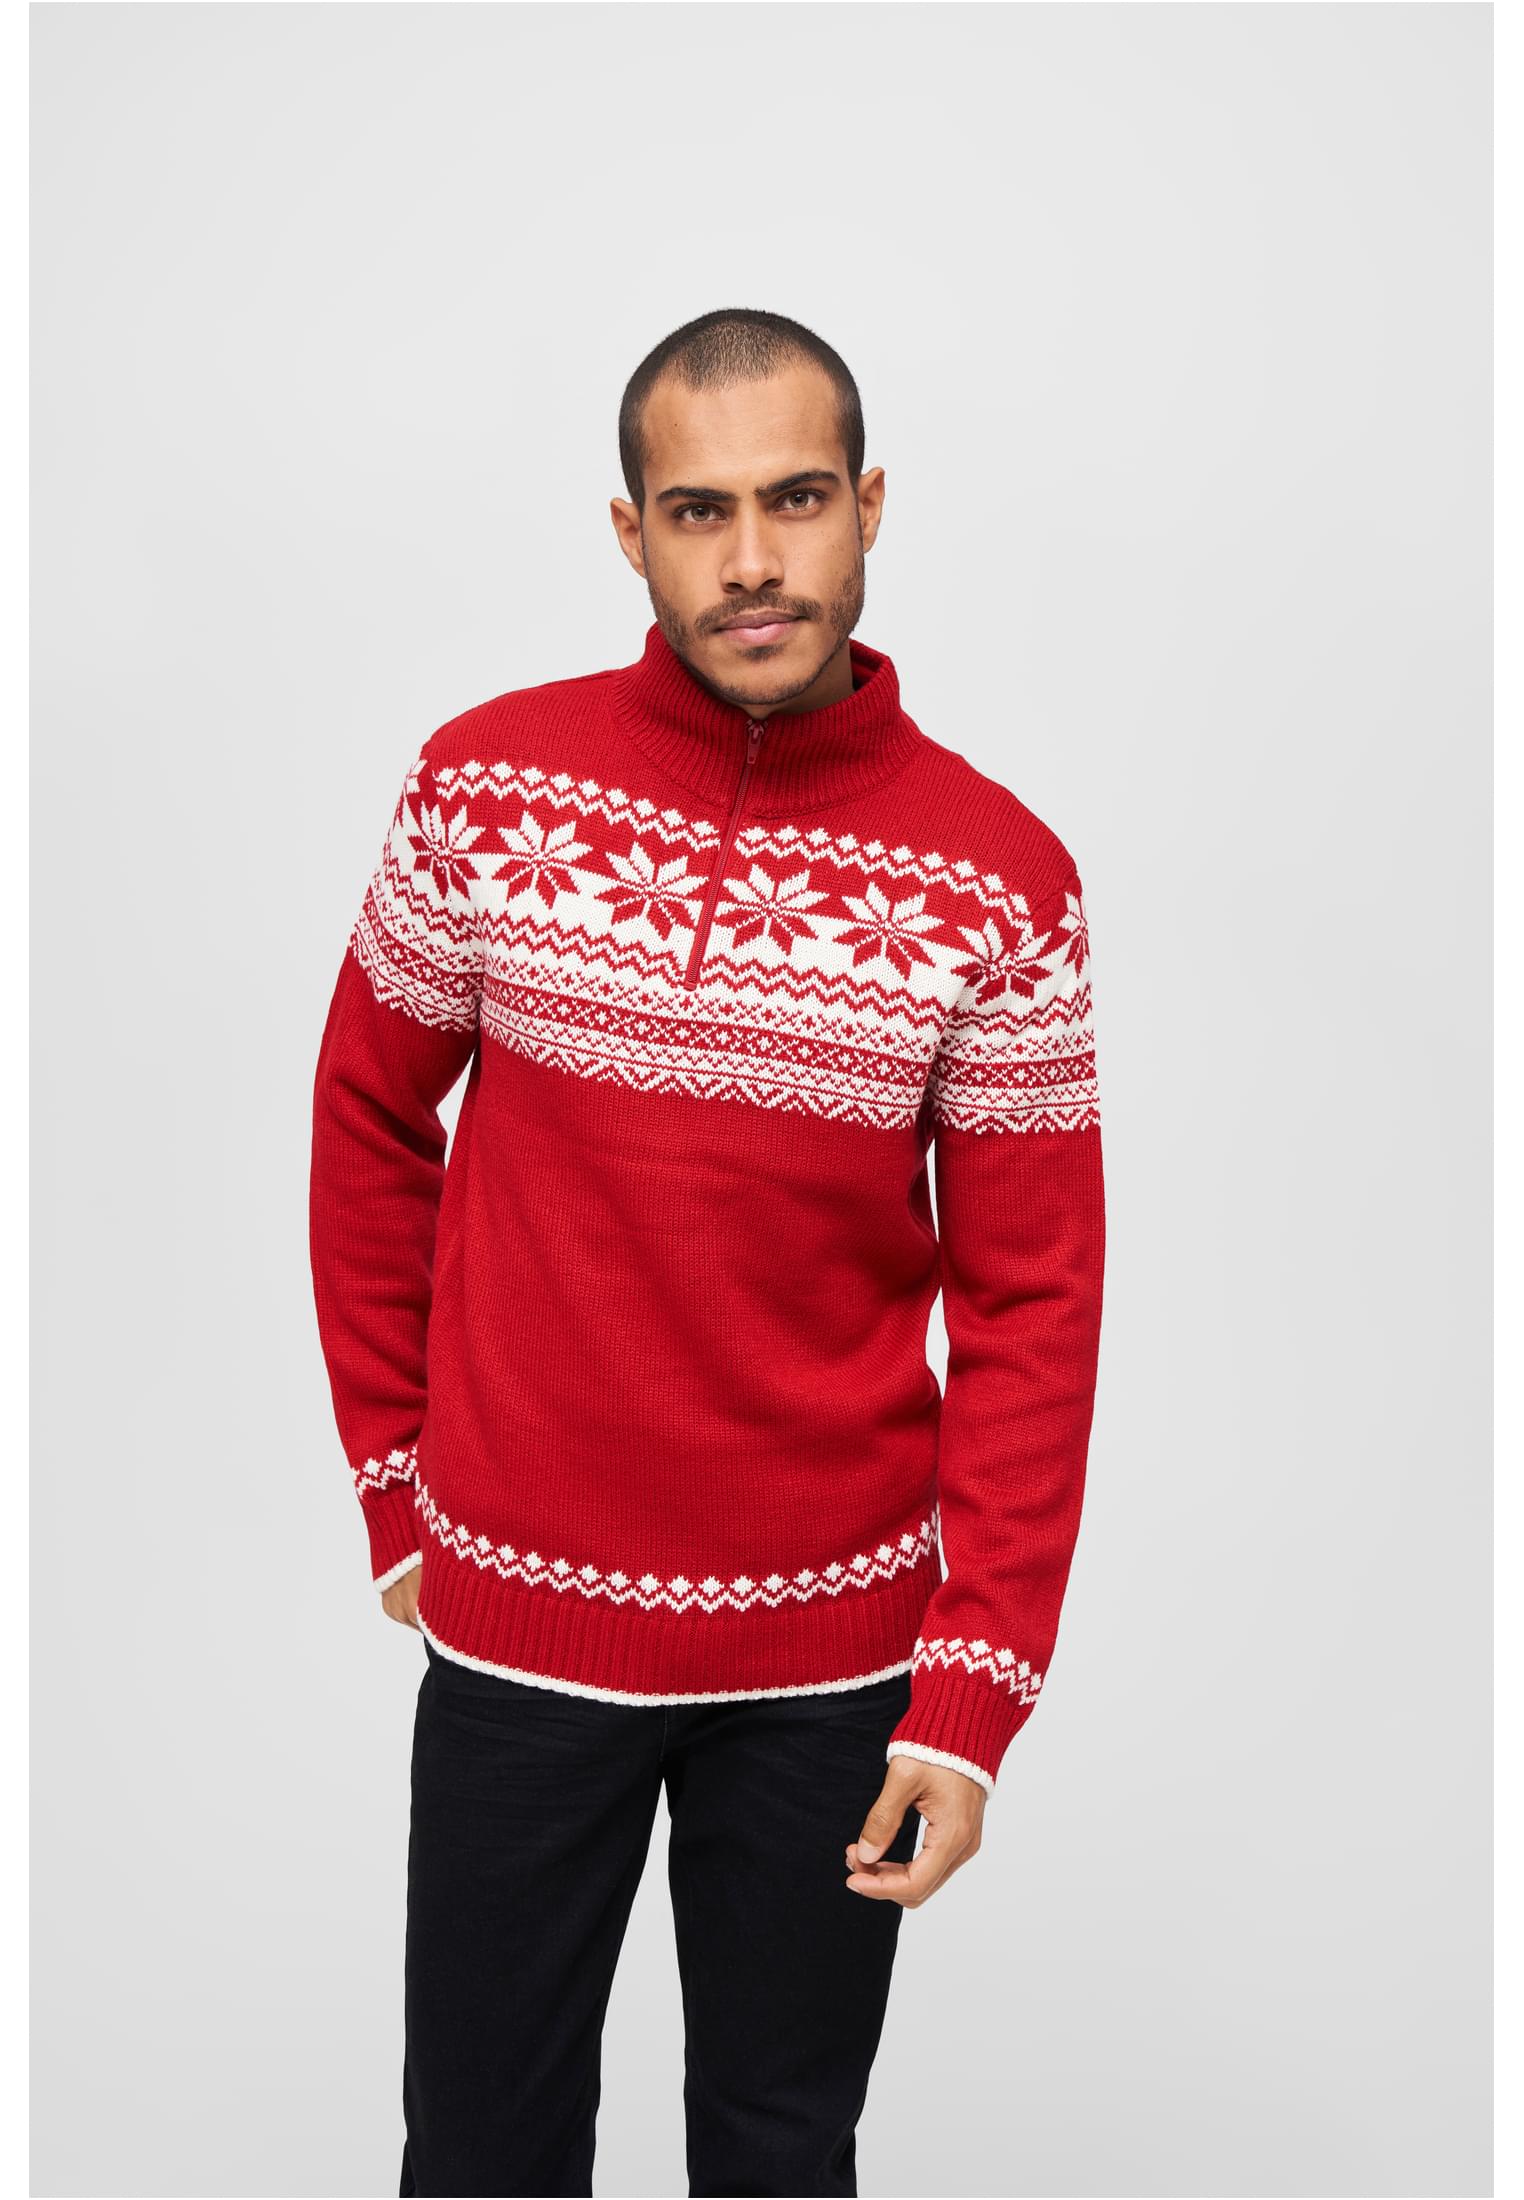 Pullover Troyer Norweger in Farbe red